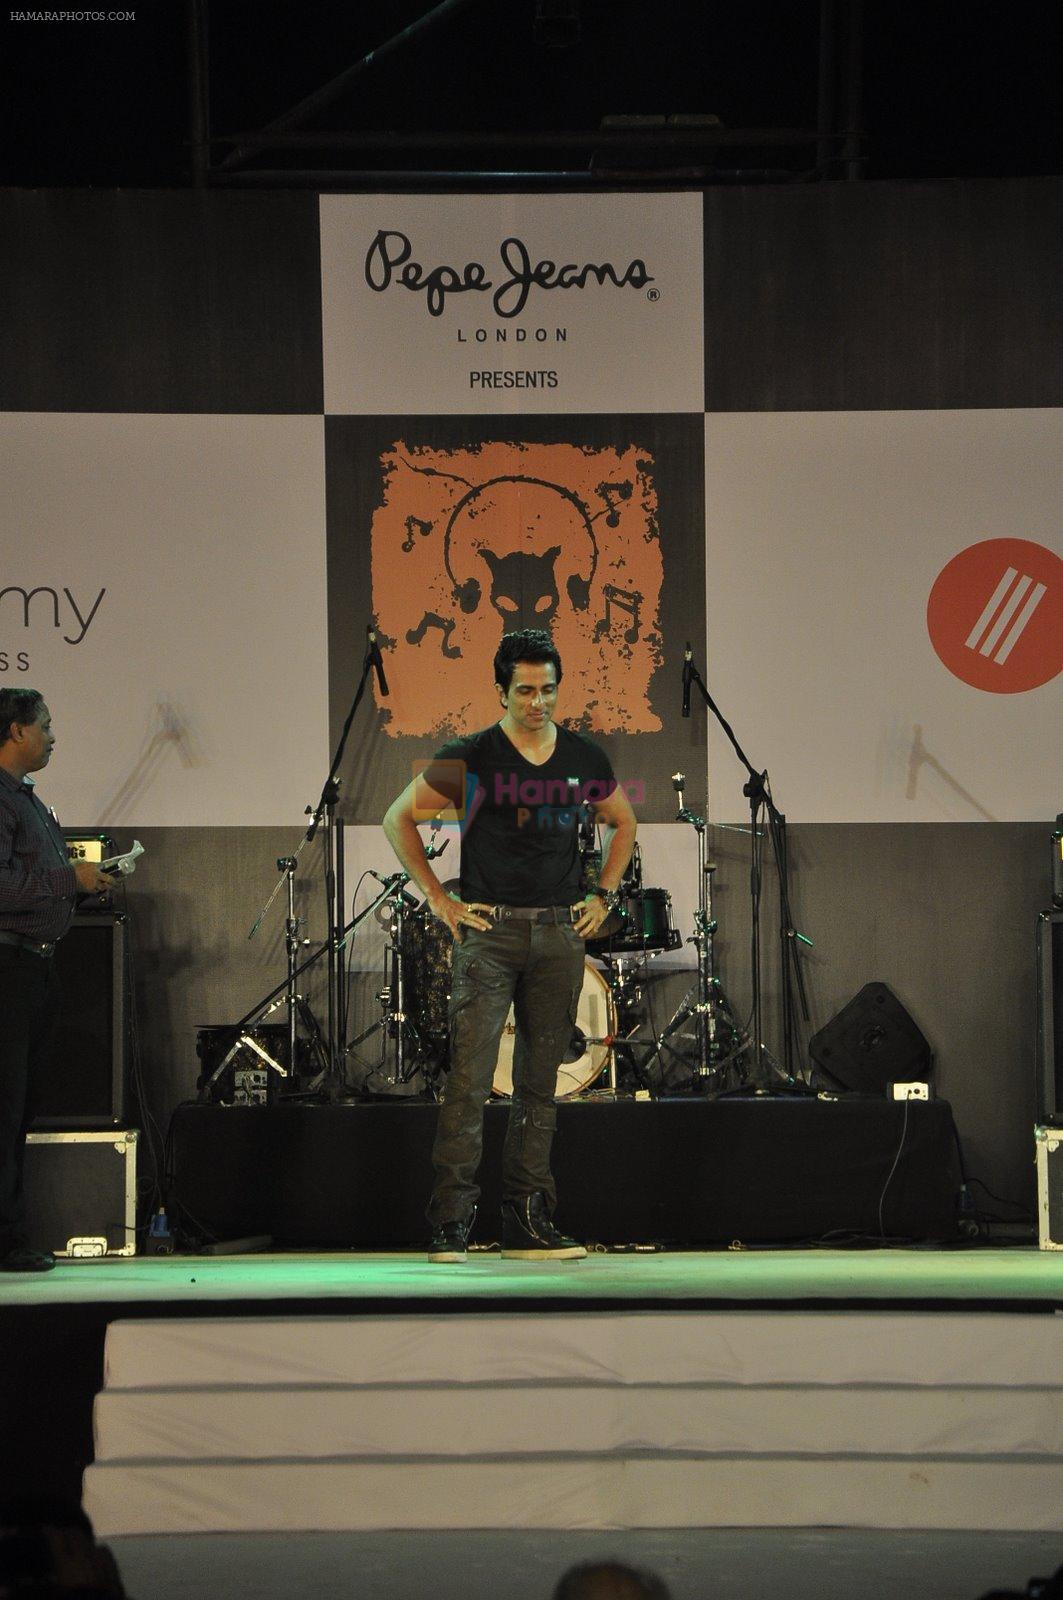 Sonu Sood at Pepe Jeans music stage at Kalaghoda Festival on 14th Feb 2015